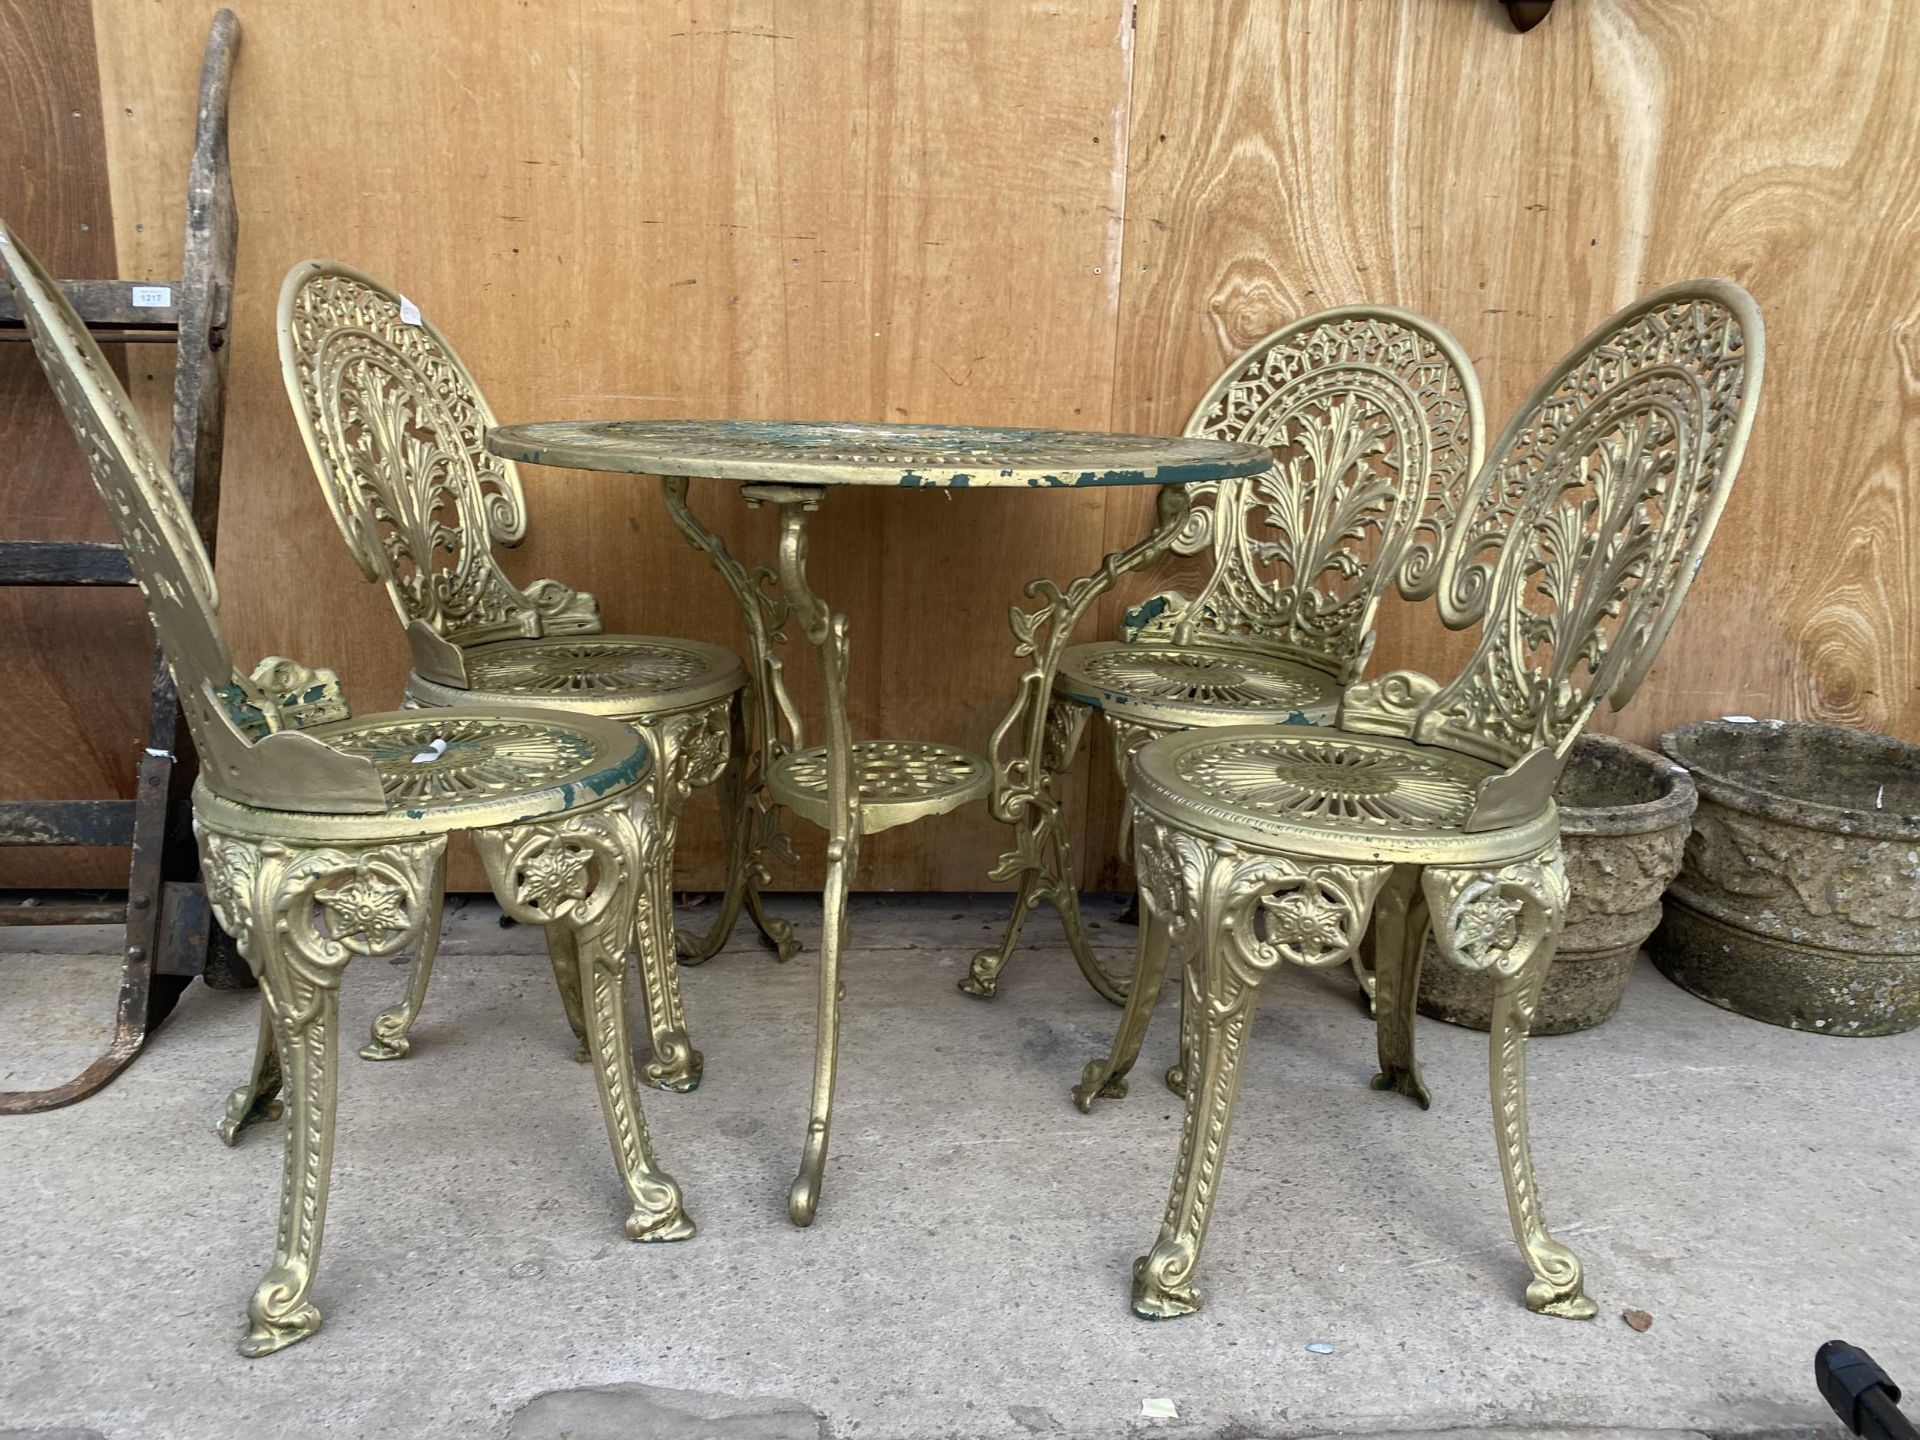 A VINTAGE STYLE CAST ALLOY BISTRO SET COMPRISING OF A ROUND TABLE AND FOUR CHAIRS - Image 3 of 4